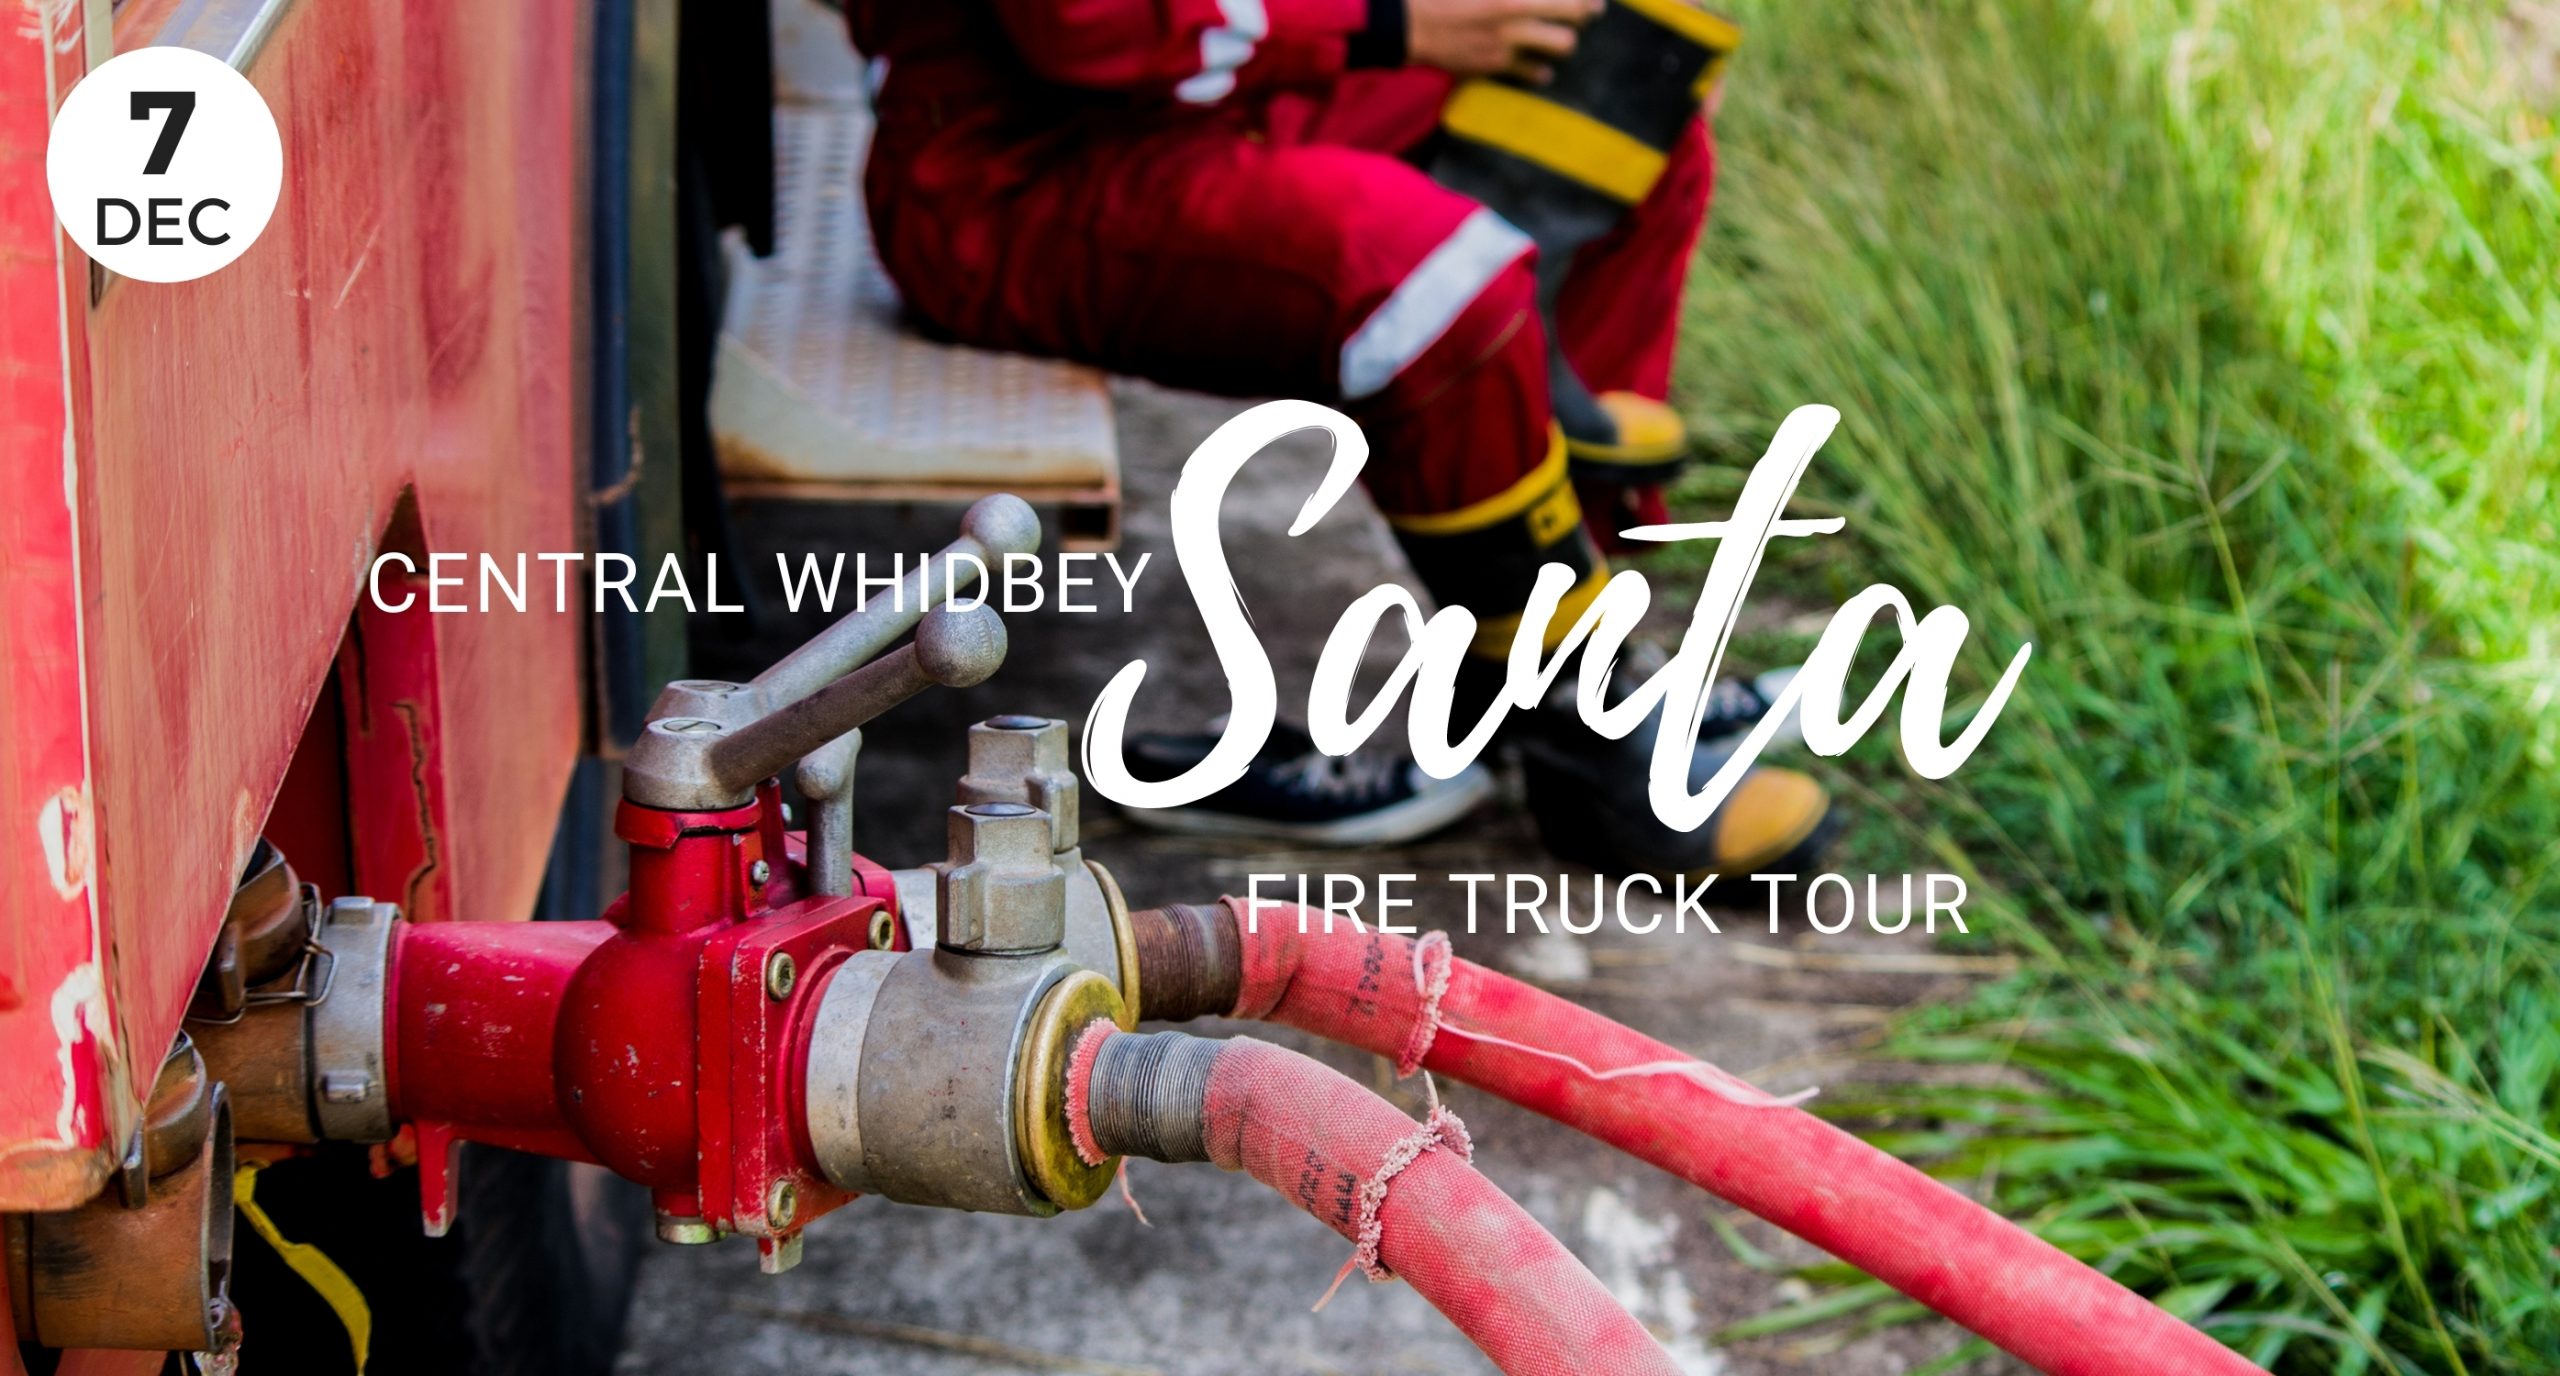 Central Whidbey Santa Fire Truck